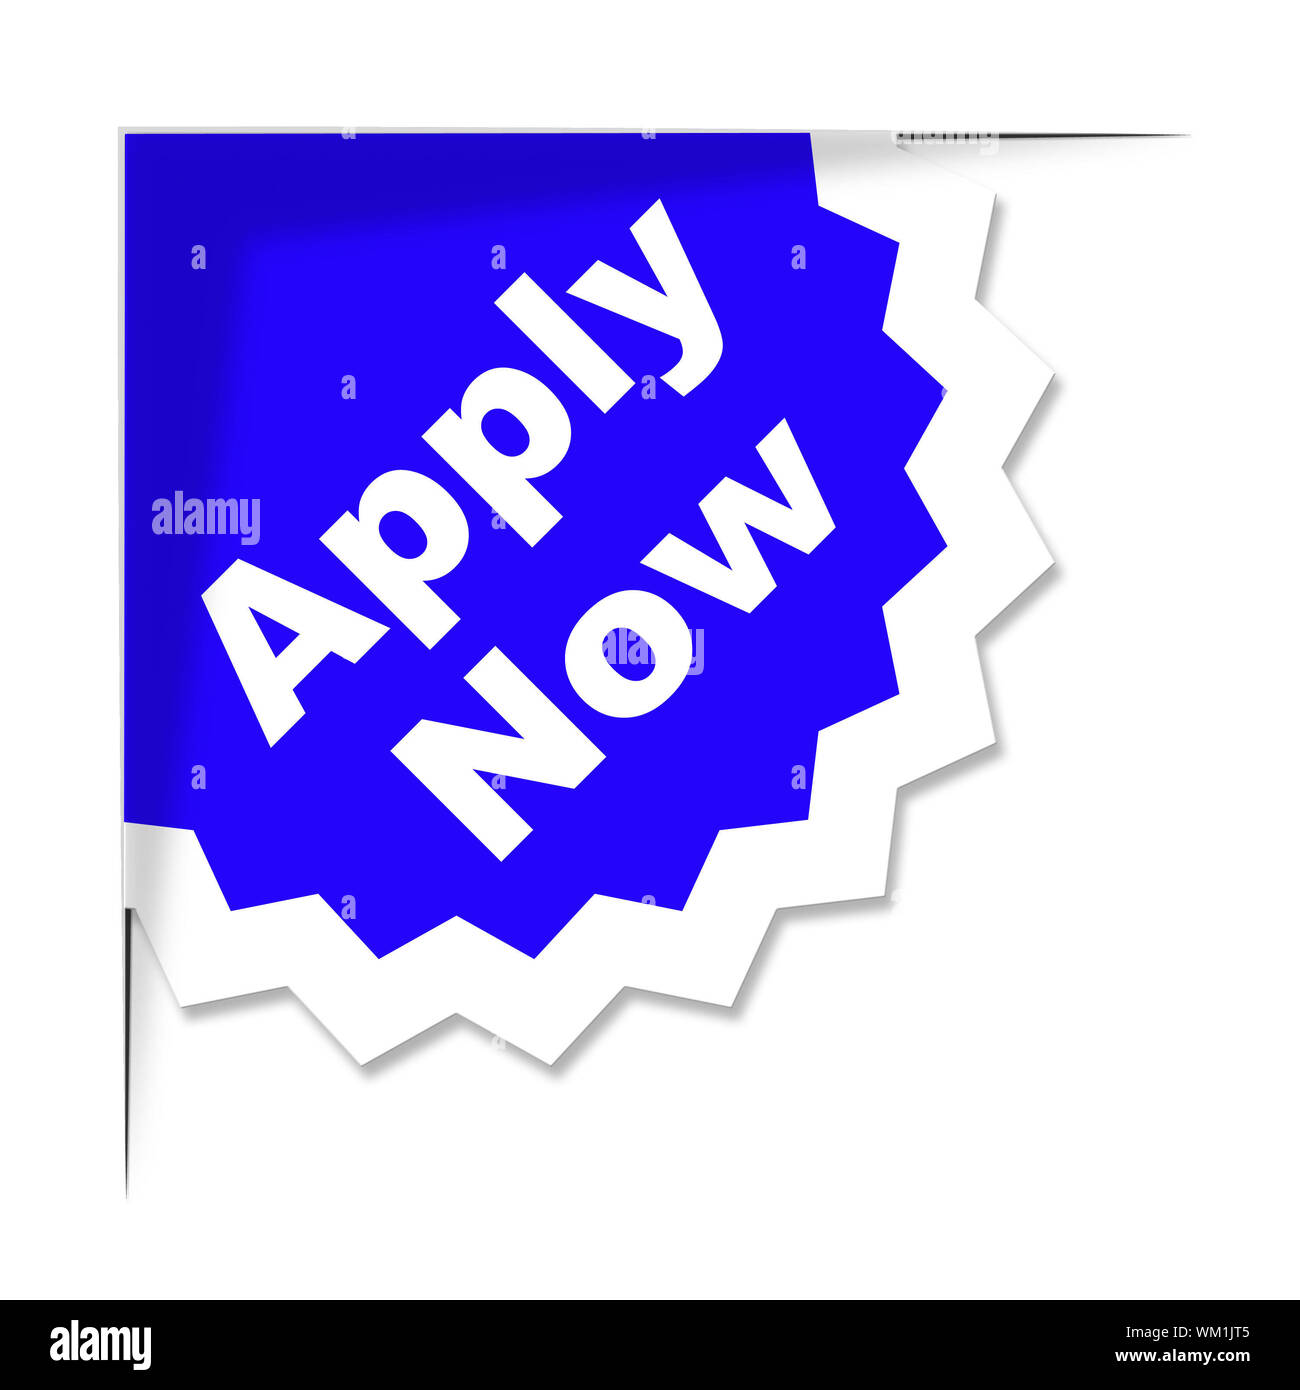 Apply Now Representing At The Moment And At This Time Stock Photo